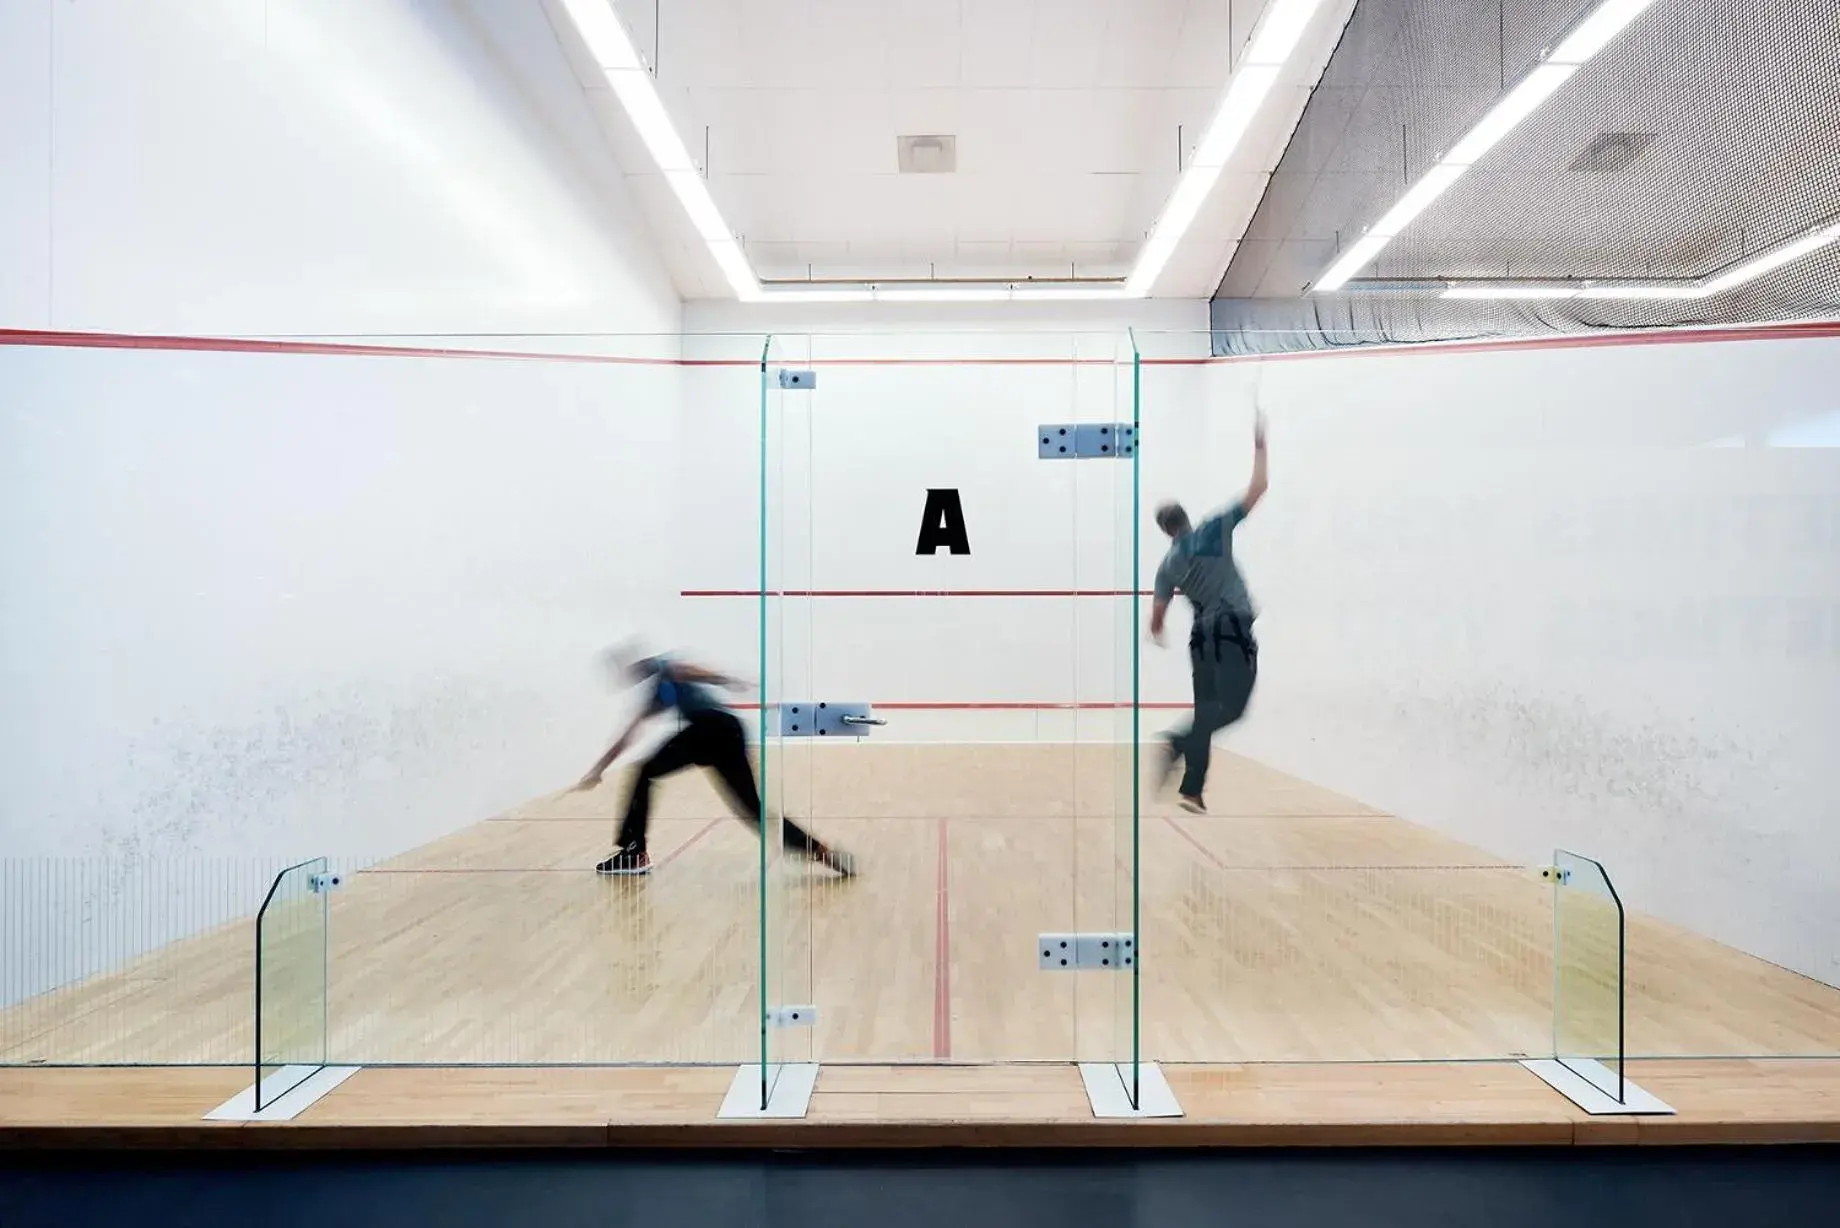 Squash, Other Activities in HUP